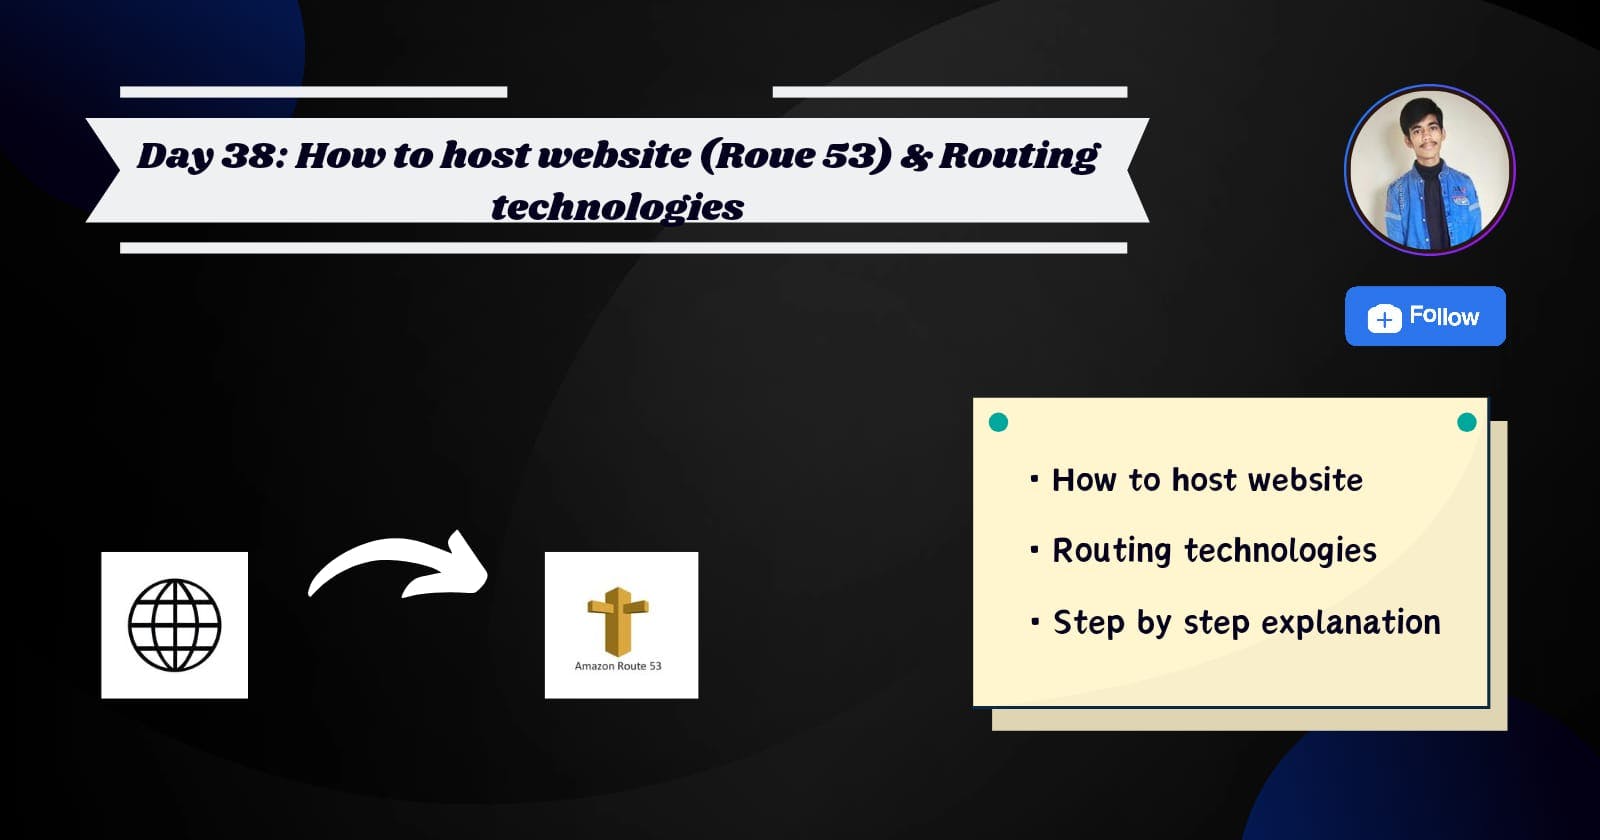 Day 38: How to Host a website (route 53) & Routing technologies